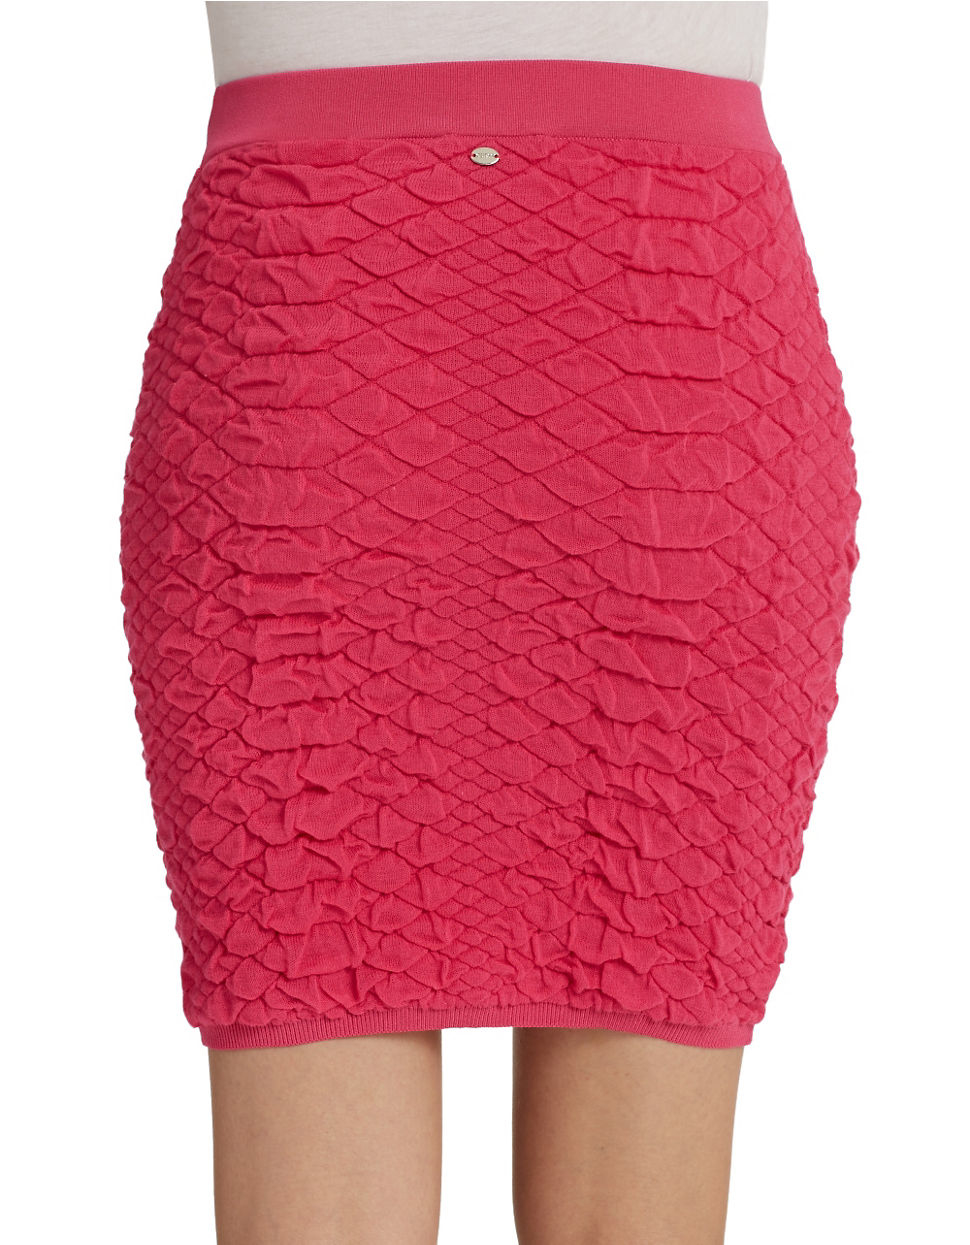 Guess Stretch Knit Skirt in Pink (Dark Pink) Lyst